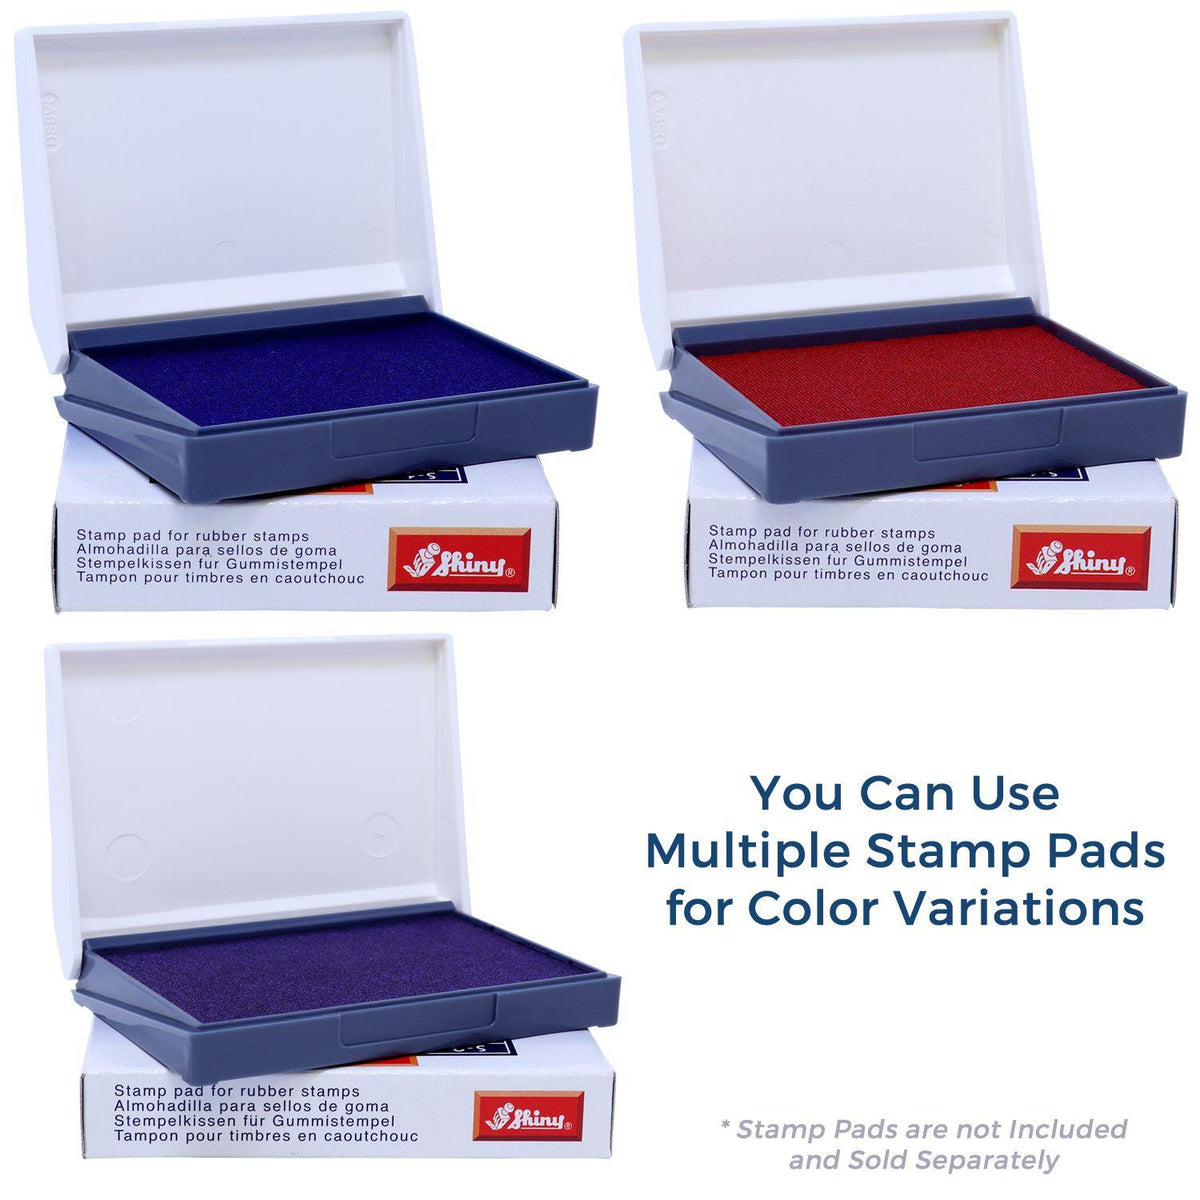 Stamp Pads for Large Dated Material Open Immediately Rubber Stamp Available